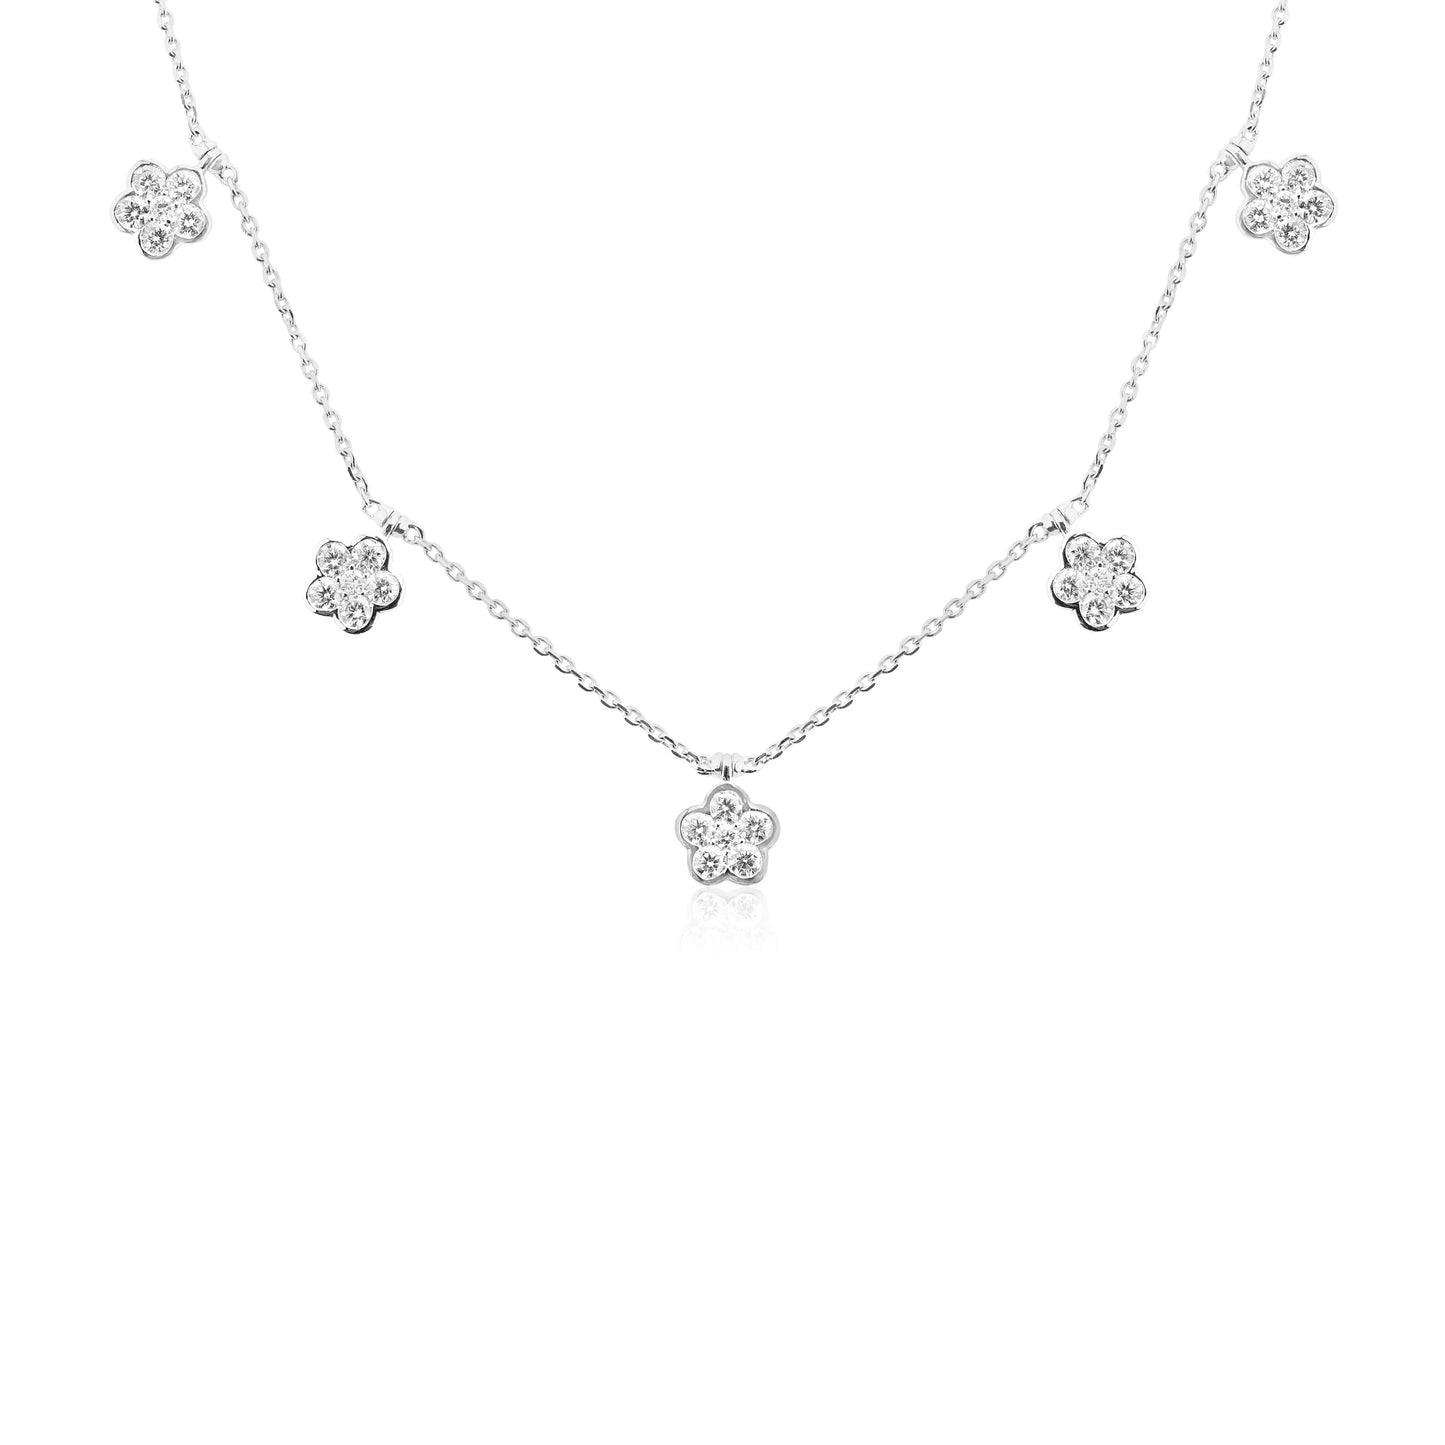 White Gold Necklaces 14k White Gold Diamond Five Cluster Necklace dansonjewelers Danson Jewelers 